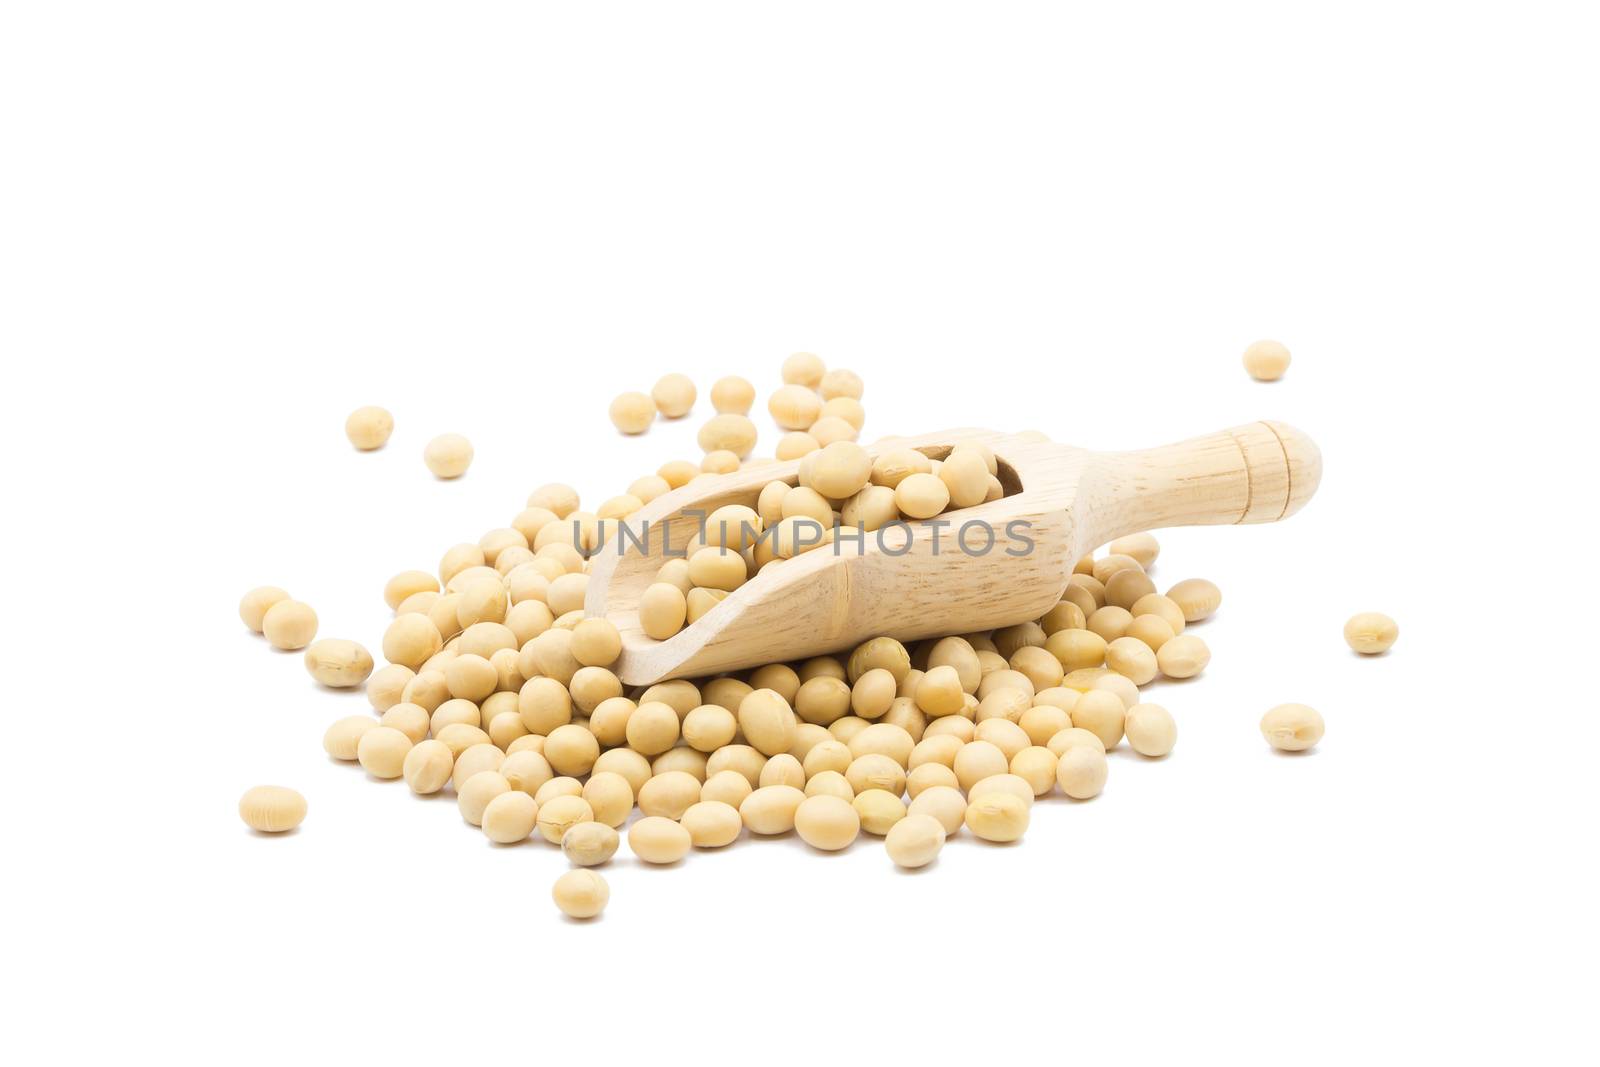 Soybean and Soybean in wooden scoop isolated on white background by kaiskynet